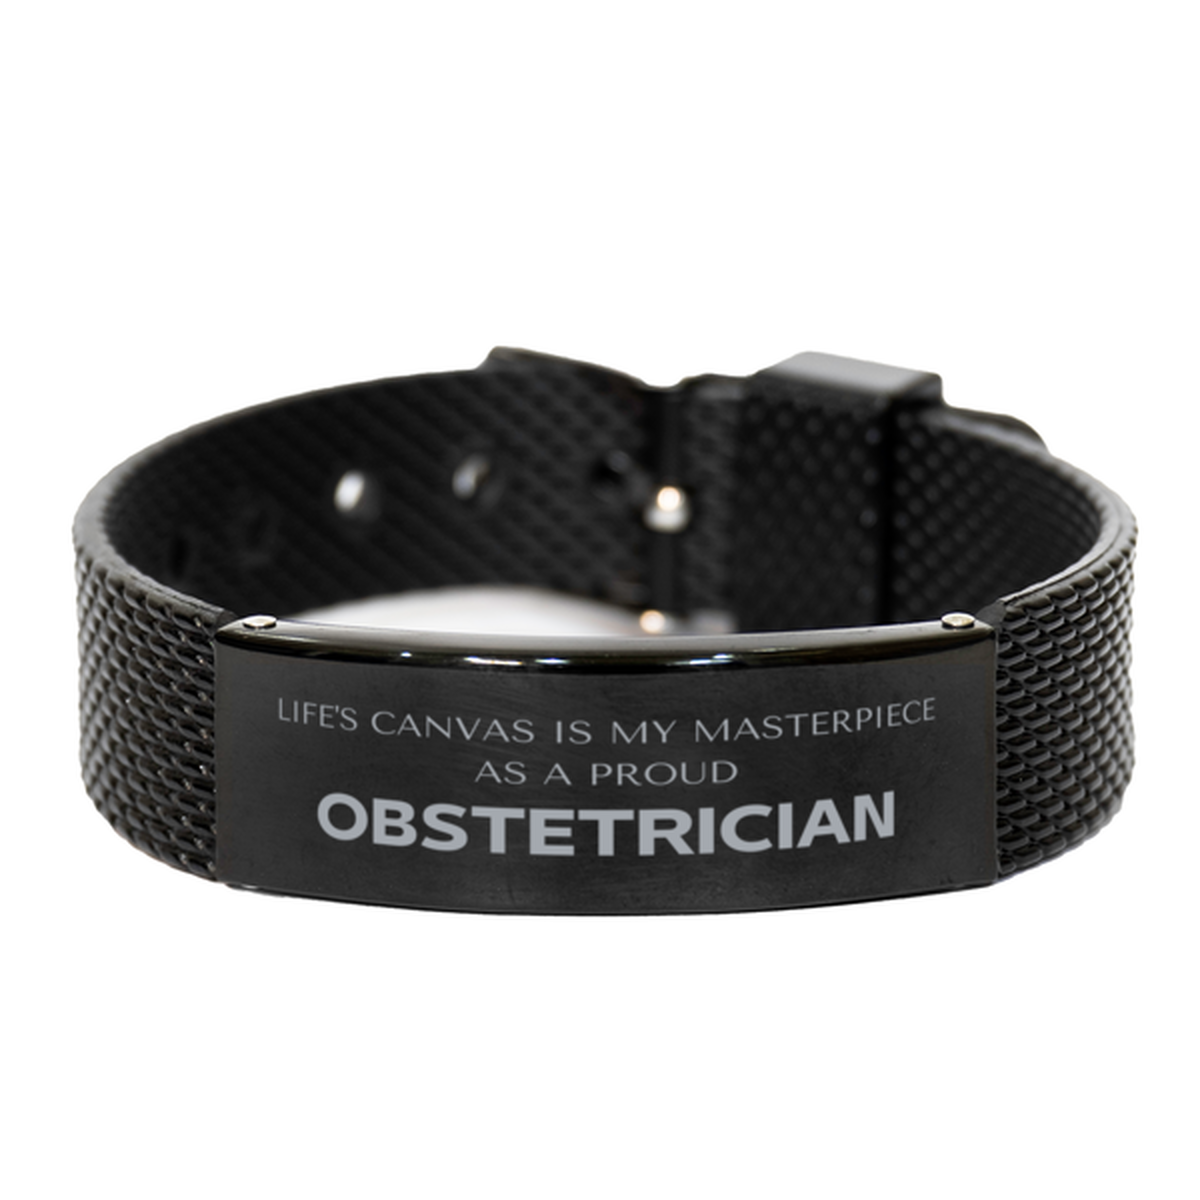 Proud Obstetrician Gifts, Life's canvas is my masterpiece, Epic Birthday Christmas Unique Black Shark Mesh Bracelet For Obstetrician, Coworkers, Men, Women, Friends